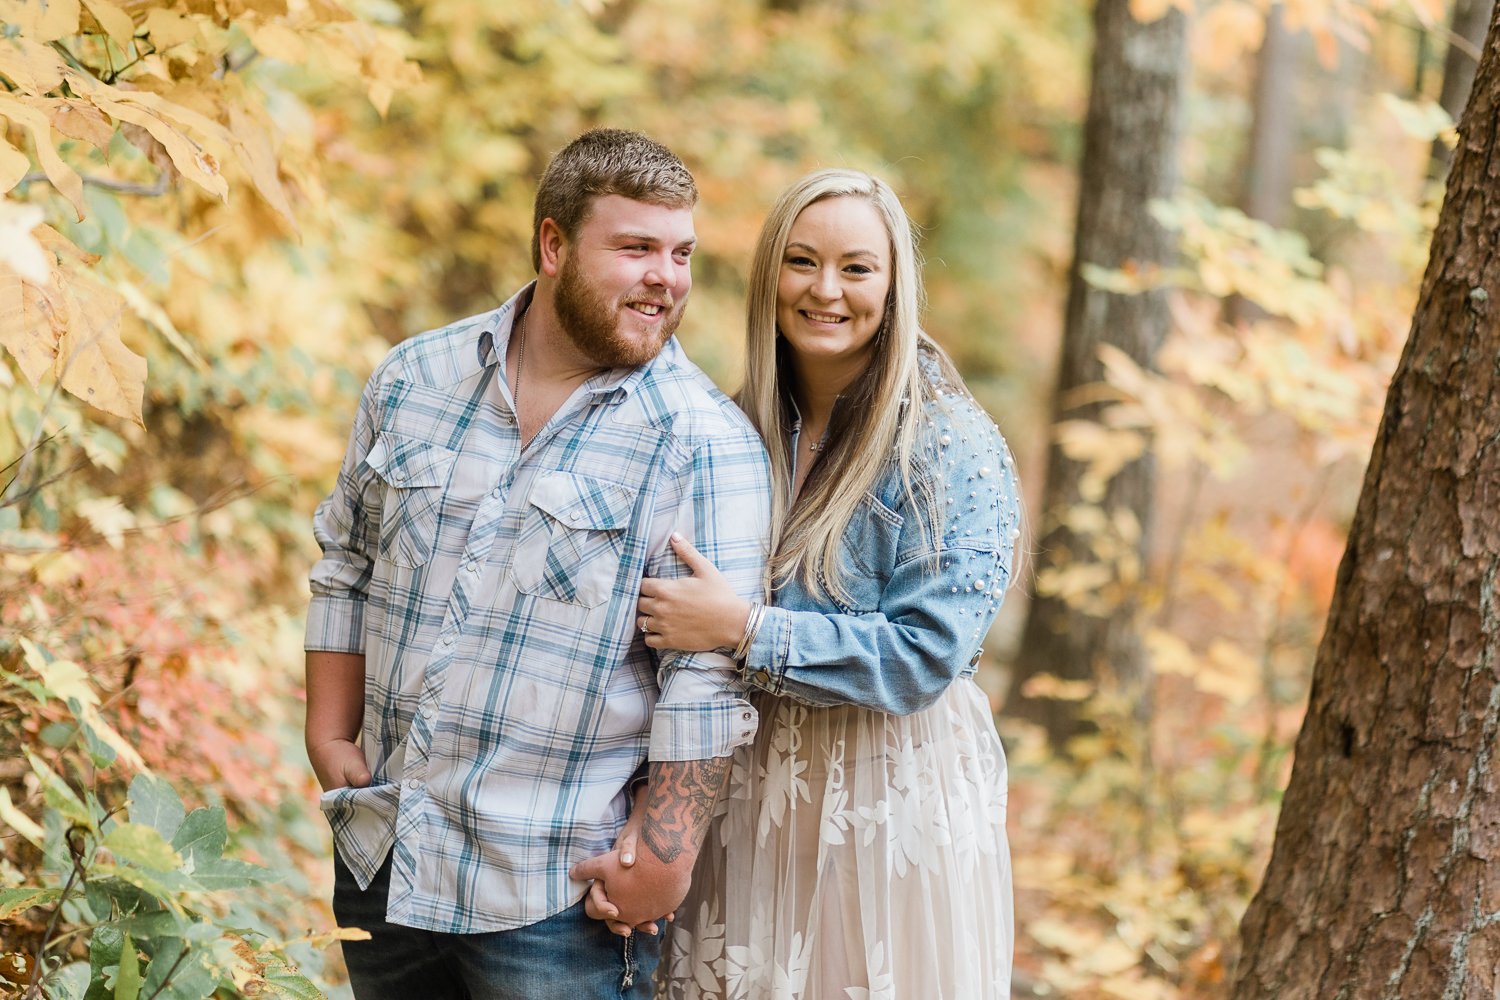 5 of the best places to take engagment photos in greenville sc-3-2.jpg